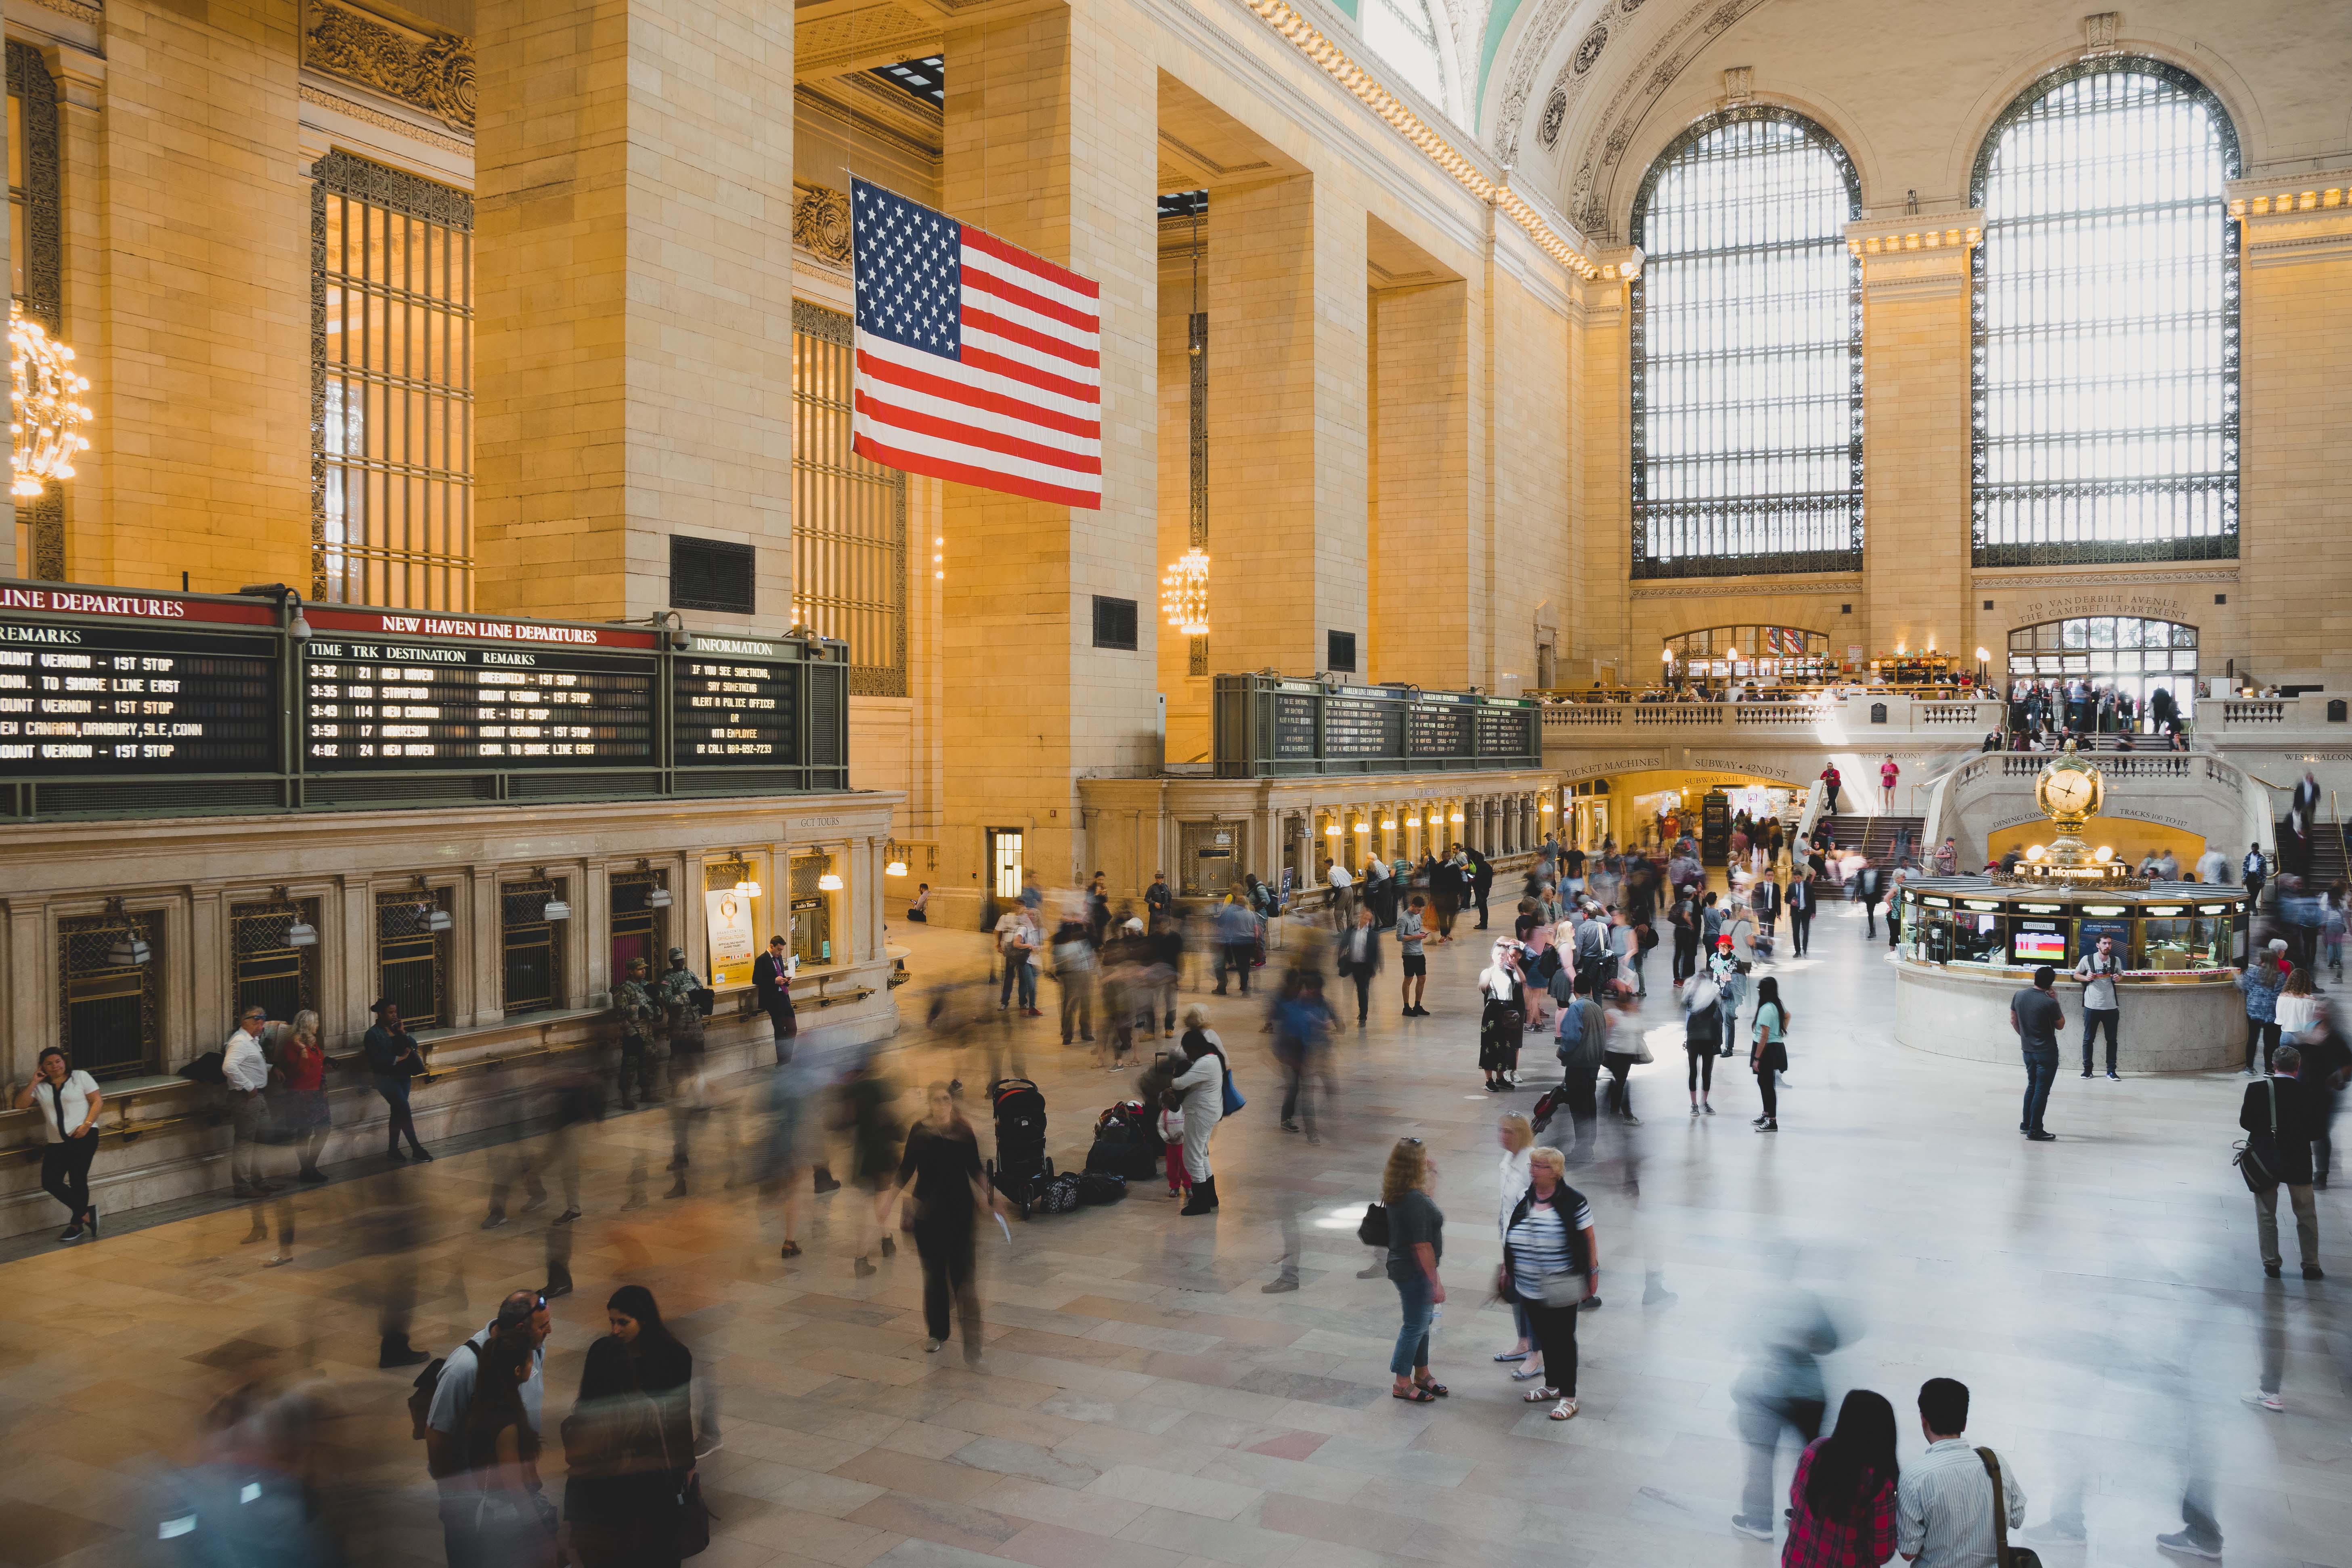 View of main hall in Grand Central long exposure with people moving quickly below the American flag and large windows